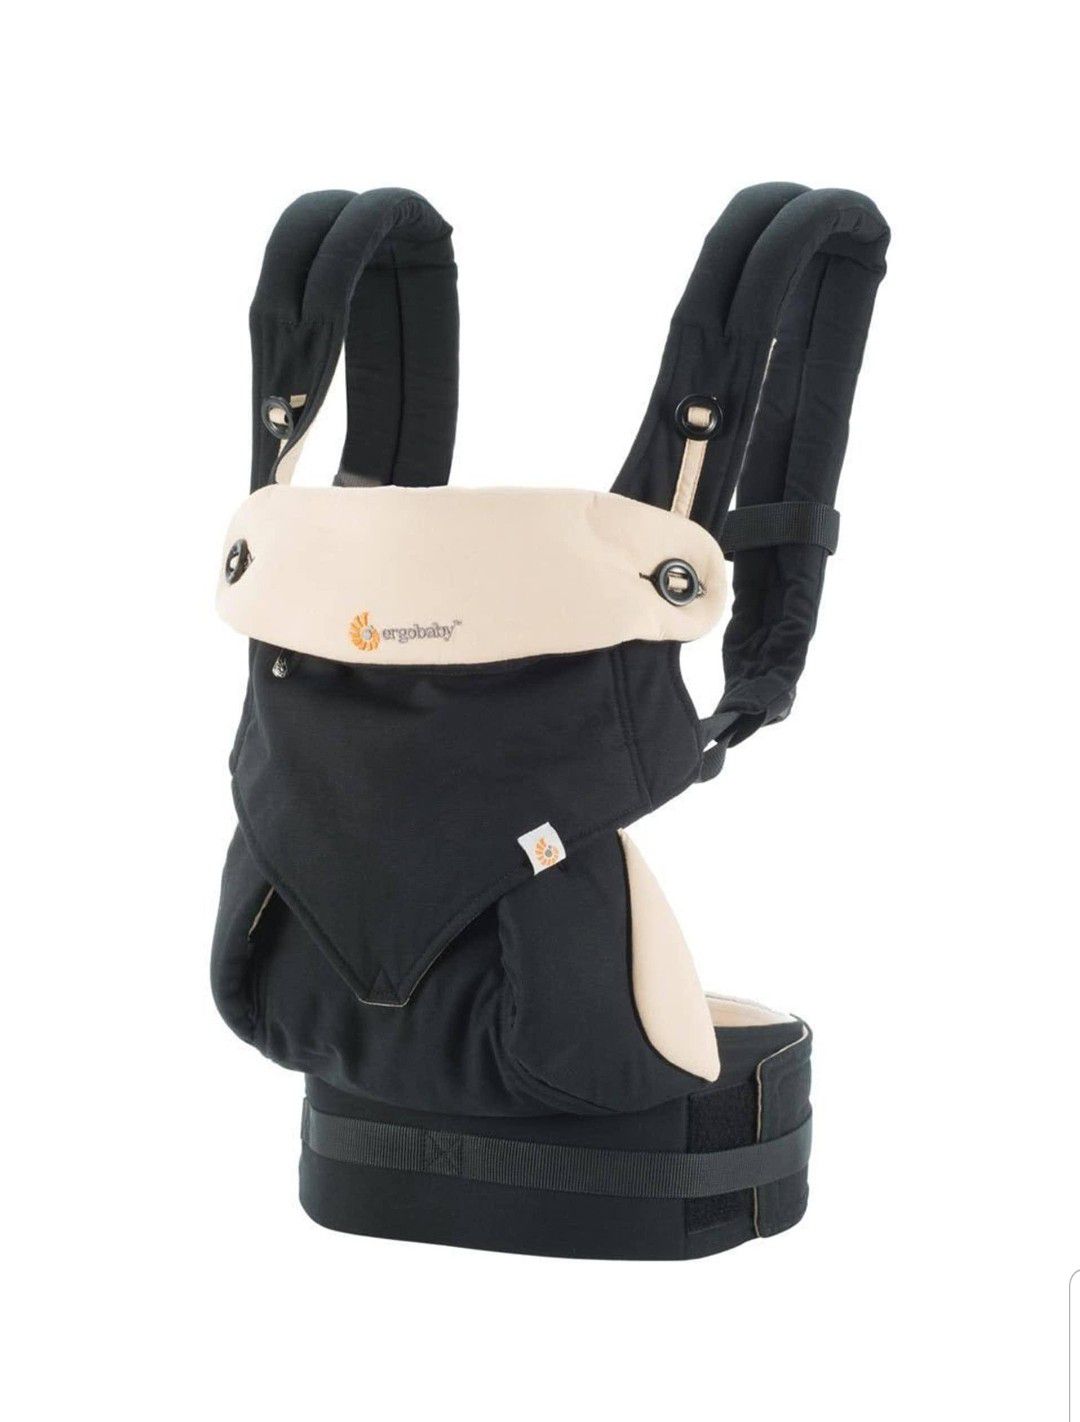 ErgoBaby 360° 4 position Baby Carrier